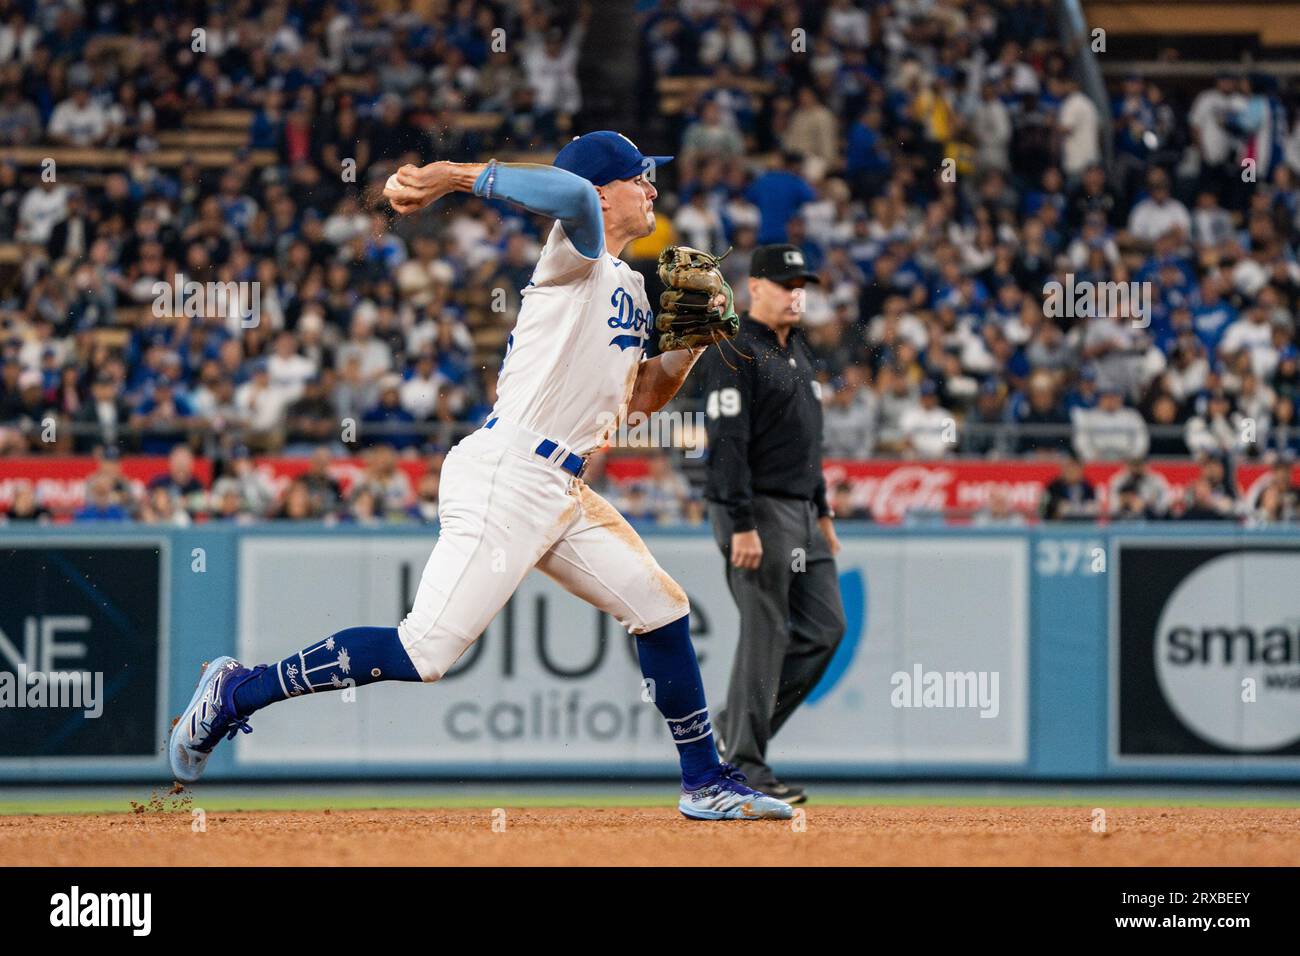 Los Angeles Dodgers shortstop Enrique Hernandez (8) throws to first base during a MLB game against the San Francisco Giants, Friday, September 22, 202 Stock Photo